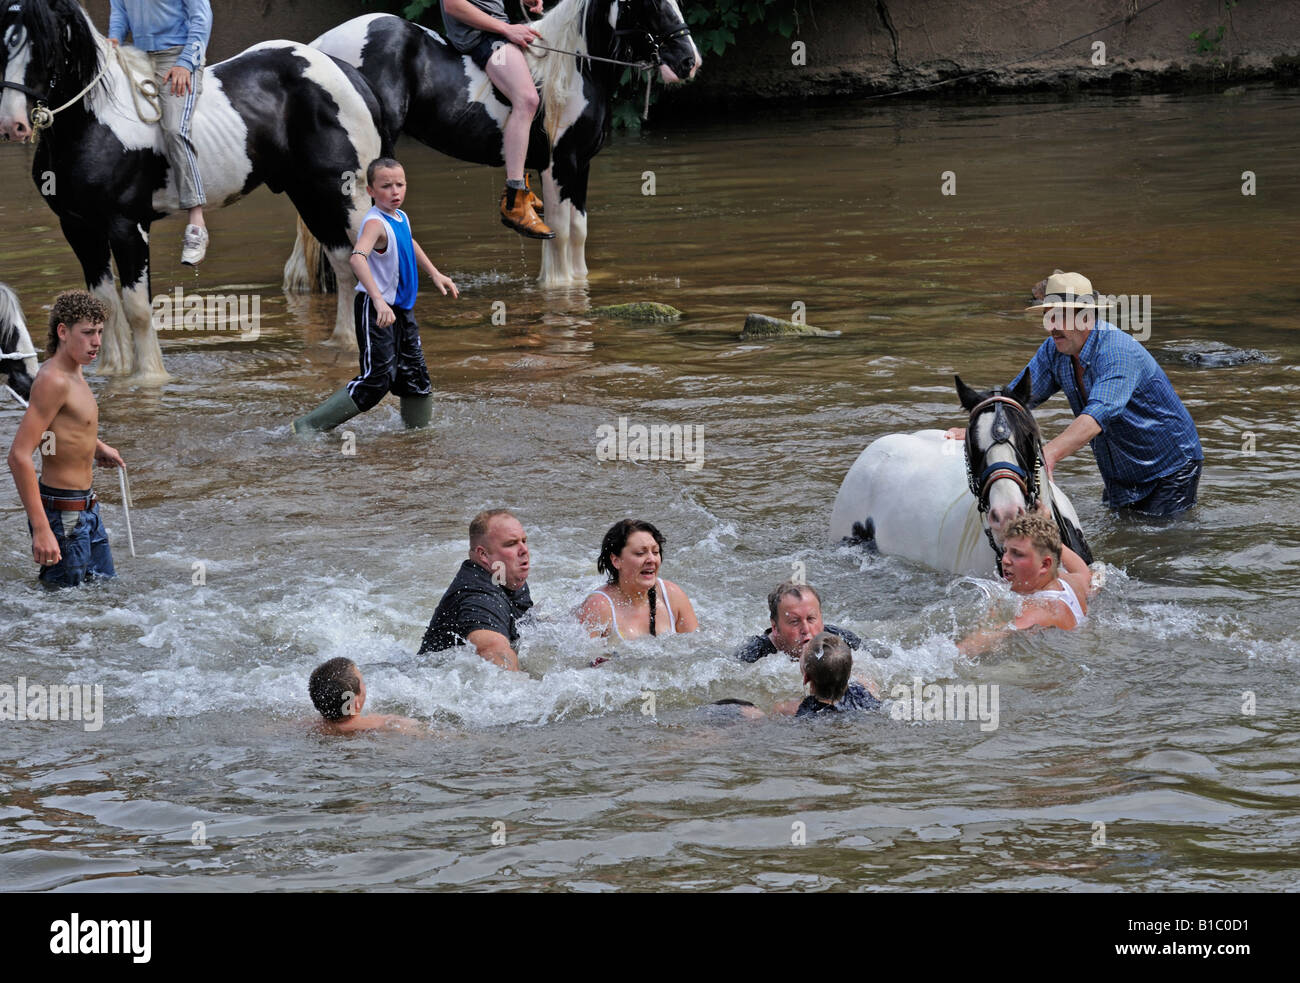 Gypsy traveller boy being rescued from drowning in River Eden. Appleby Horse Fair. Appleby-in-Westmorland, Cumbria, England. Stock Photo